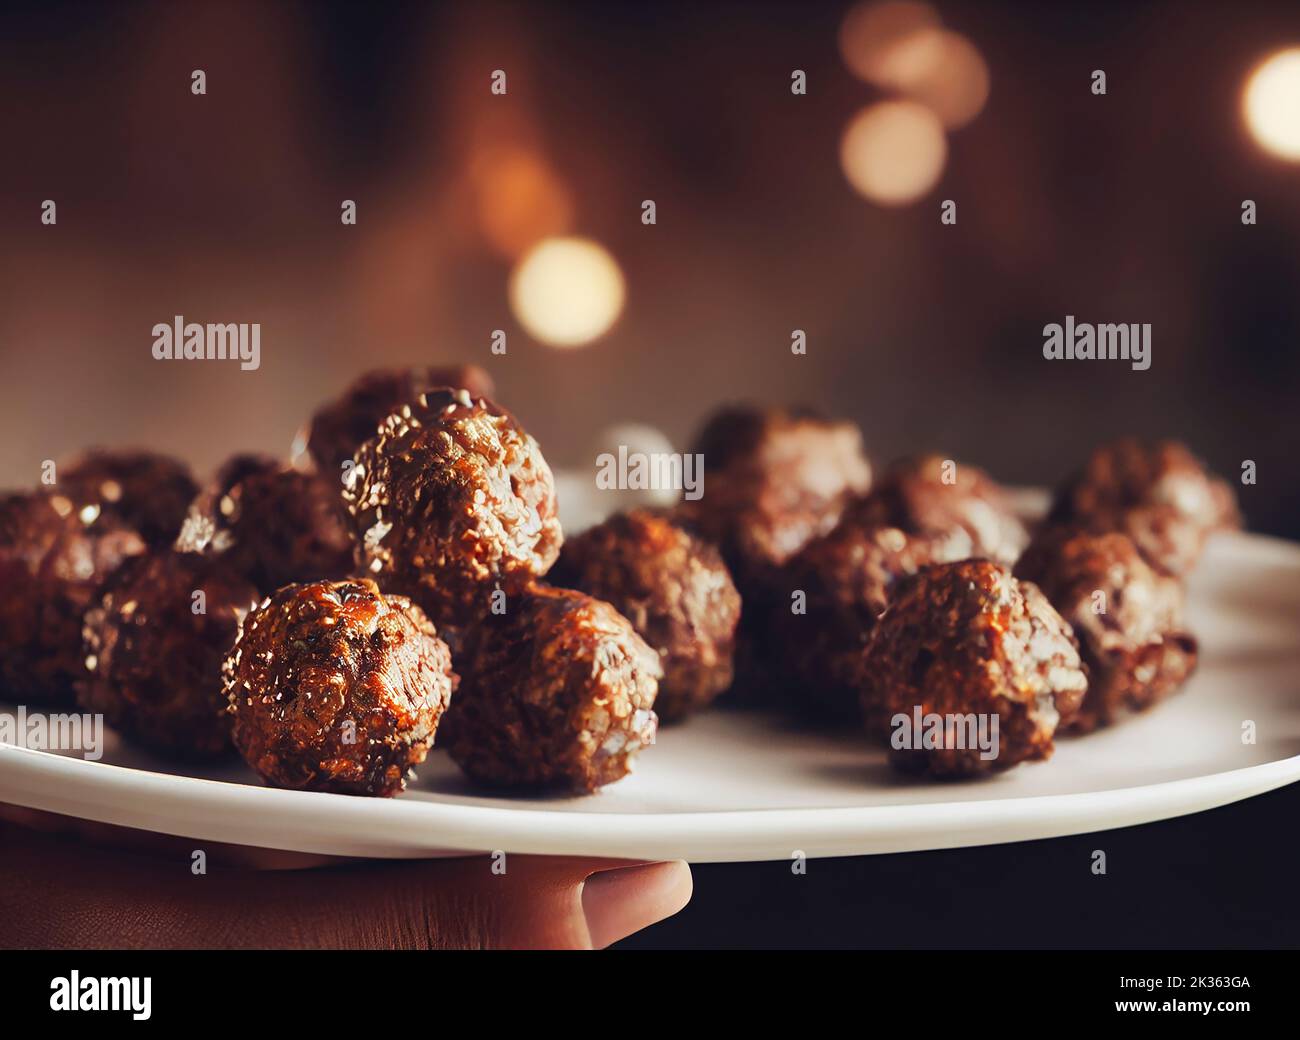 Hands holding a plate with meatballs, selective focus on the meat balls, dark background, food photography and illustration Stock Photo